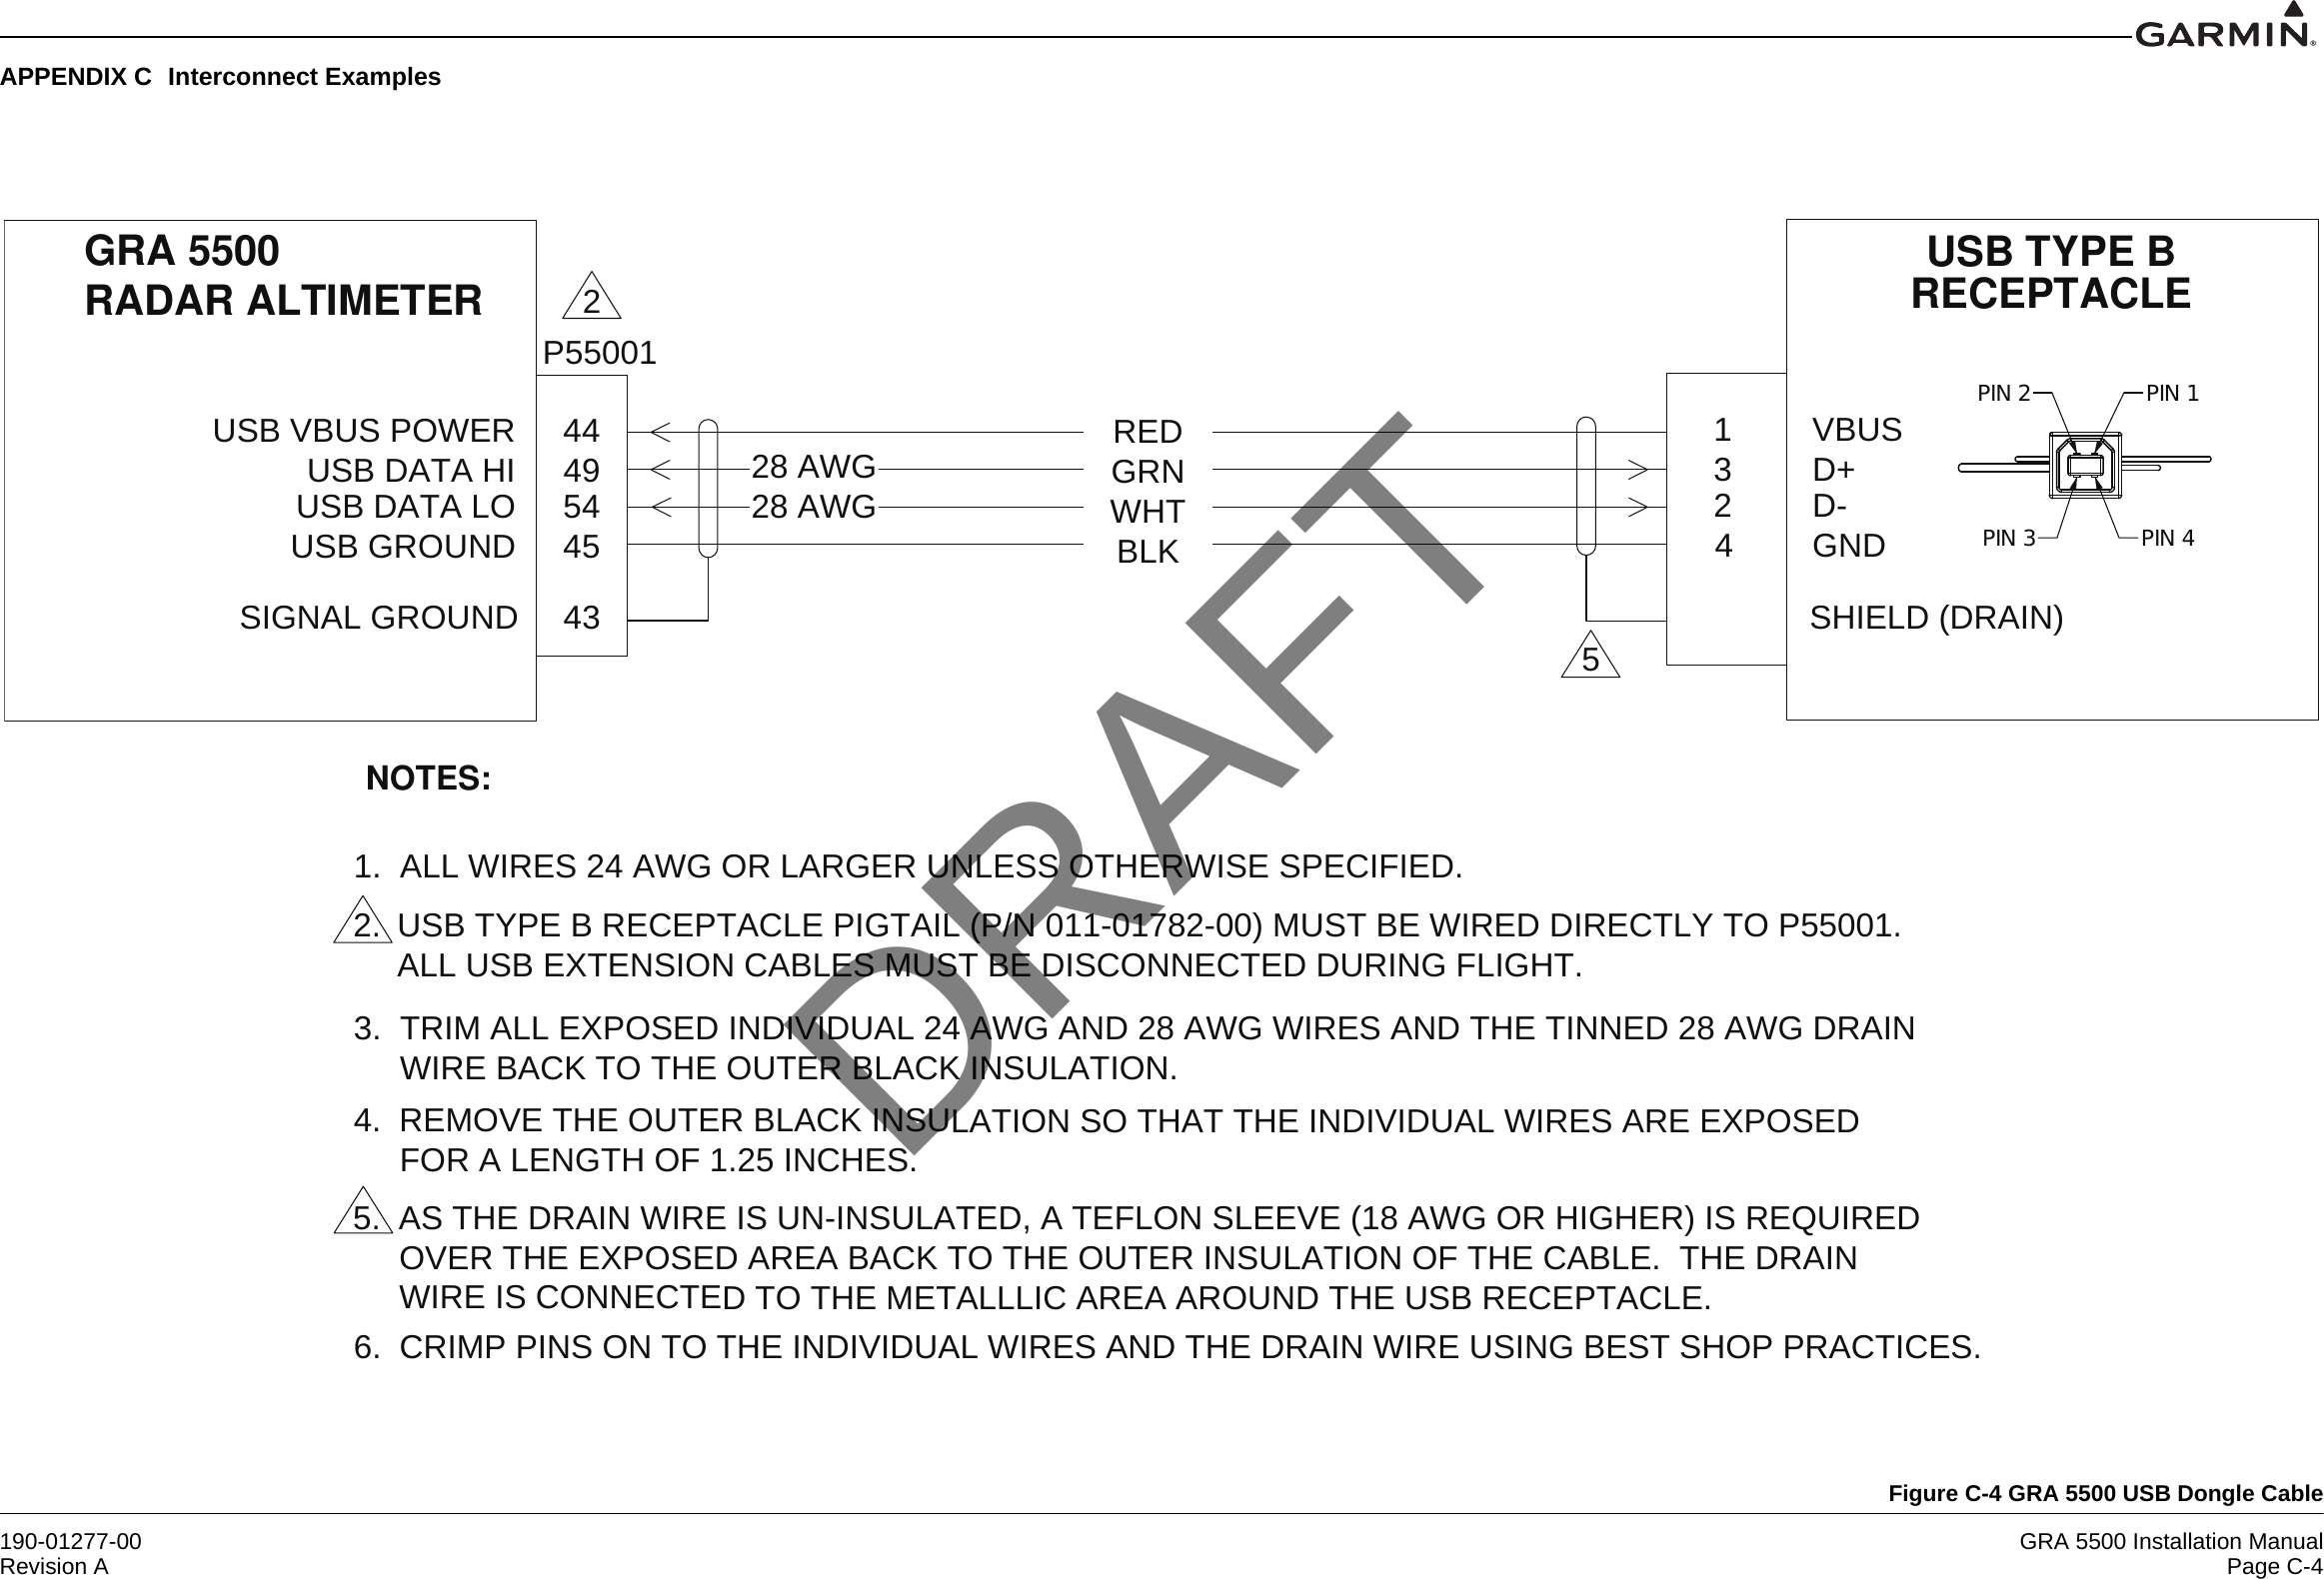 190-01277-00 GRA 5500 Installation ManualRevision A Page C-4APPENDIX C Interconnect ExamplesFigure C-4 GRA 5500 USB Dongle CableGRA 5500RADAR ALTIMETER USB TYPE BRECEPTACLENOTES:1.  ALL WIRES 24 AWG OR LARGER UNLESS OTHERWISE SPECIFIED. 4. REMOVE THE OUTER BLACK INSULATION SO THAT THE INDIVIDUAL WIRES ARE EXPOSED      FOR A LENGTH OF 1.25 INCHES. 6. CRIMP PINS ON TO THE INDIVIDUAL WIRES AND THE DRAIN WIRE USING BEST SHOP PRACTICES.USB DATA HIUSB VBUS POWERUSB DATA LOUSB GROUND44495445VBUSD+D-GND1324SHIELD (DRAIN)REDGRNWHTBLK28 AWG28 AWG5SIGNAL GROUND 433.  TRIM ALL EXPOSED INDIVIDUAL 24 AWG AND 28 AWG WIRES AND THE TINNED 28 AWG DRAIN     WIRE BACK TO THE OUTER BLACK INSULATION. USB TYPE B RECEPTACLE PIGTAIL (P/N 011-01782-00) MUST BE WIRED DIRECTLY TO P55001. ALL USB EXTENSION CABLES MUST BE DISCONNECTED DURING FLIGHT.  2  2.  5. AS THE DRAIN WIRE IS UN-INSULATED, A TEFLON SLEEVE (18 AWG OR HIGHER) IS REQUIRED      OVER THE EXPOSED AREA BACK TO THE OUTER INSULATION OF THE CABLE.  THE DRAIN     WIRE IS CONNECTED TO THE METALLLIC AREA AROUND THE USB RECEPTACLE. PIN 3PIN 1PIN 2PIN 4P55001DRAFT